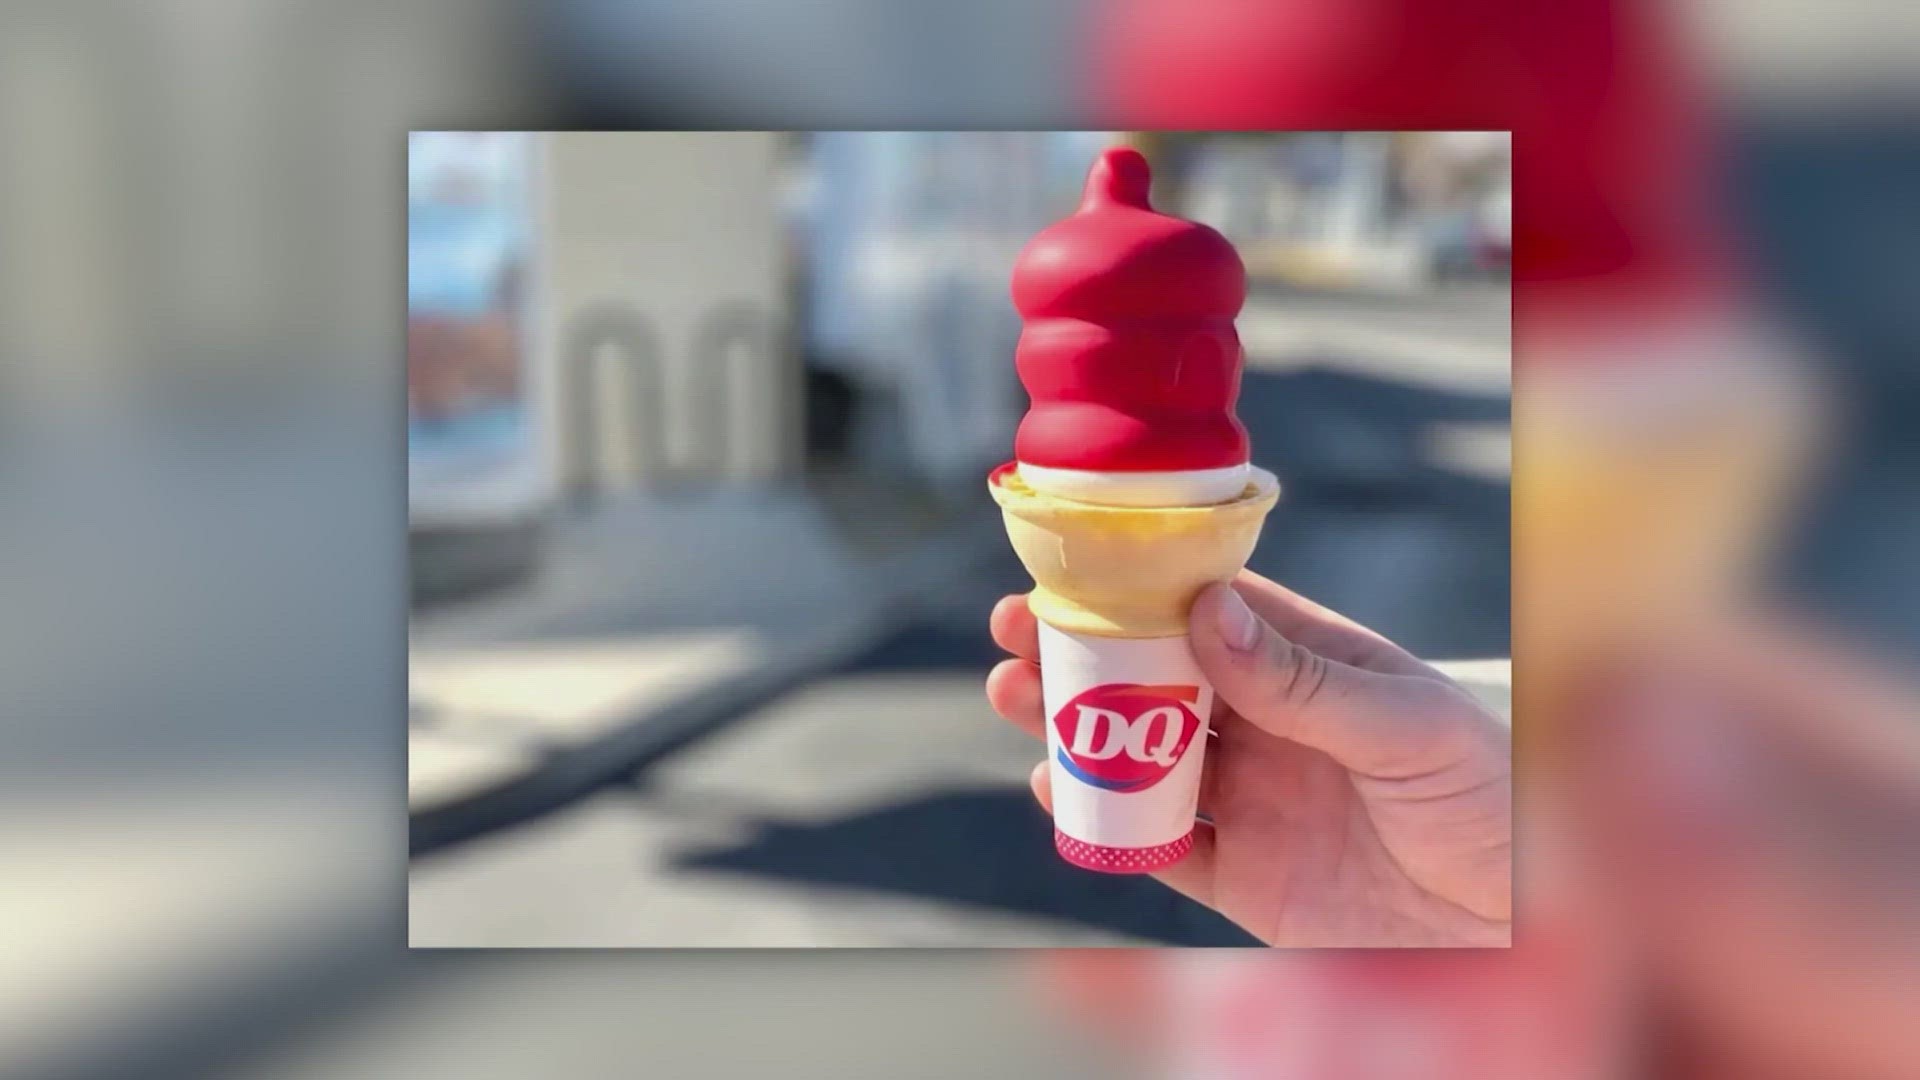 Dairy Queen giving out millions of free ice cream cones Tuesday